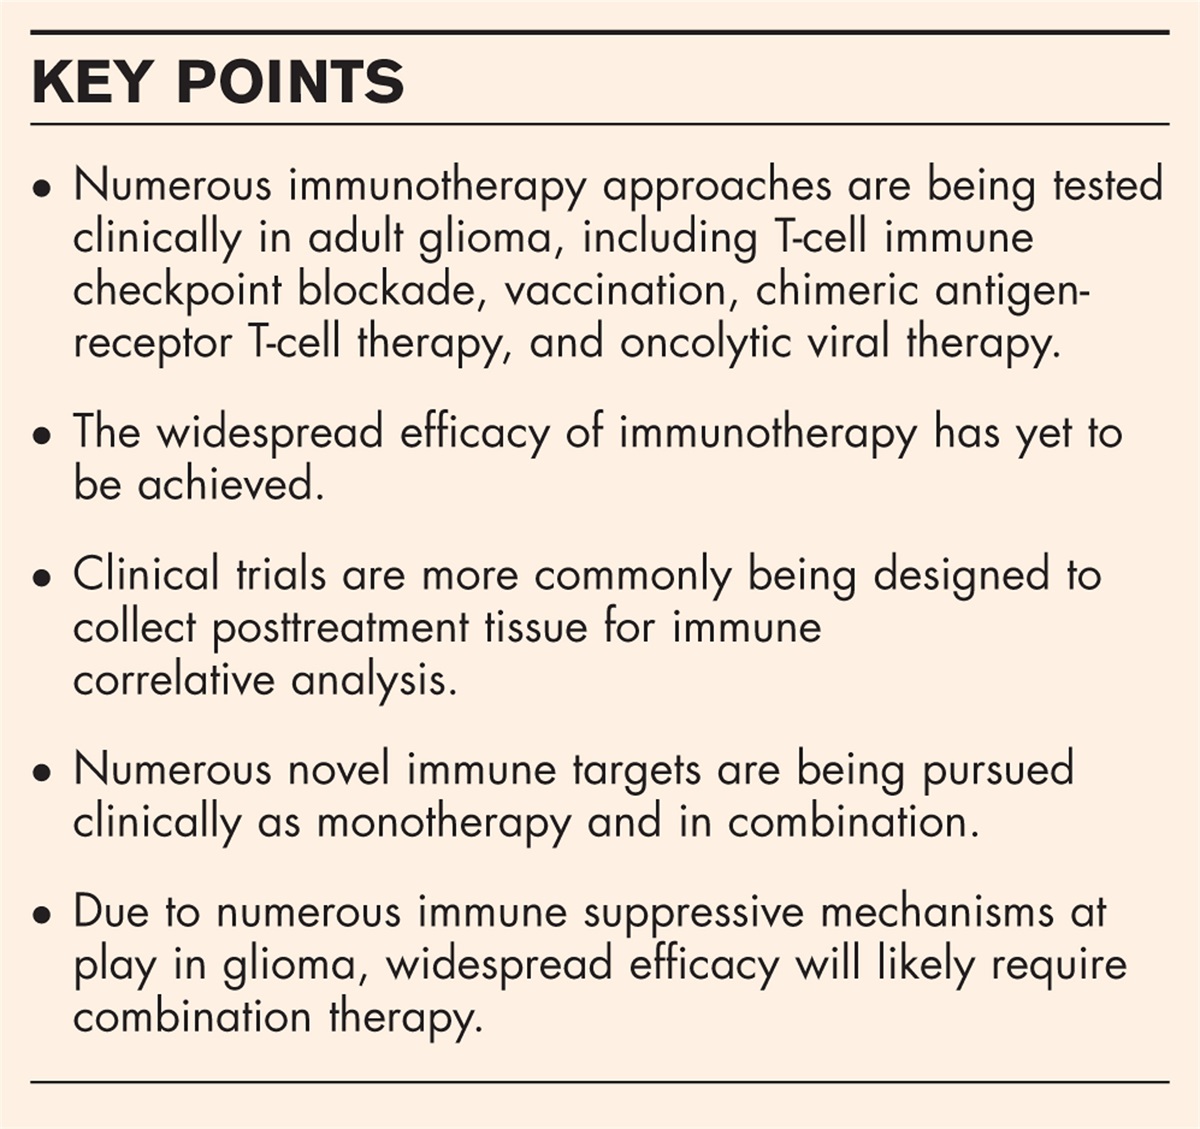 Immunotherapy approaches for adult glioma: knowledge gained from recent clinical trials